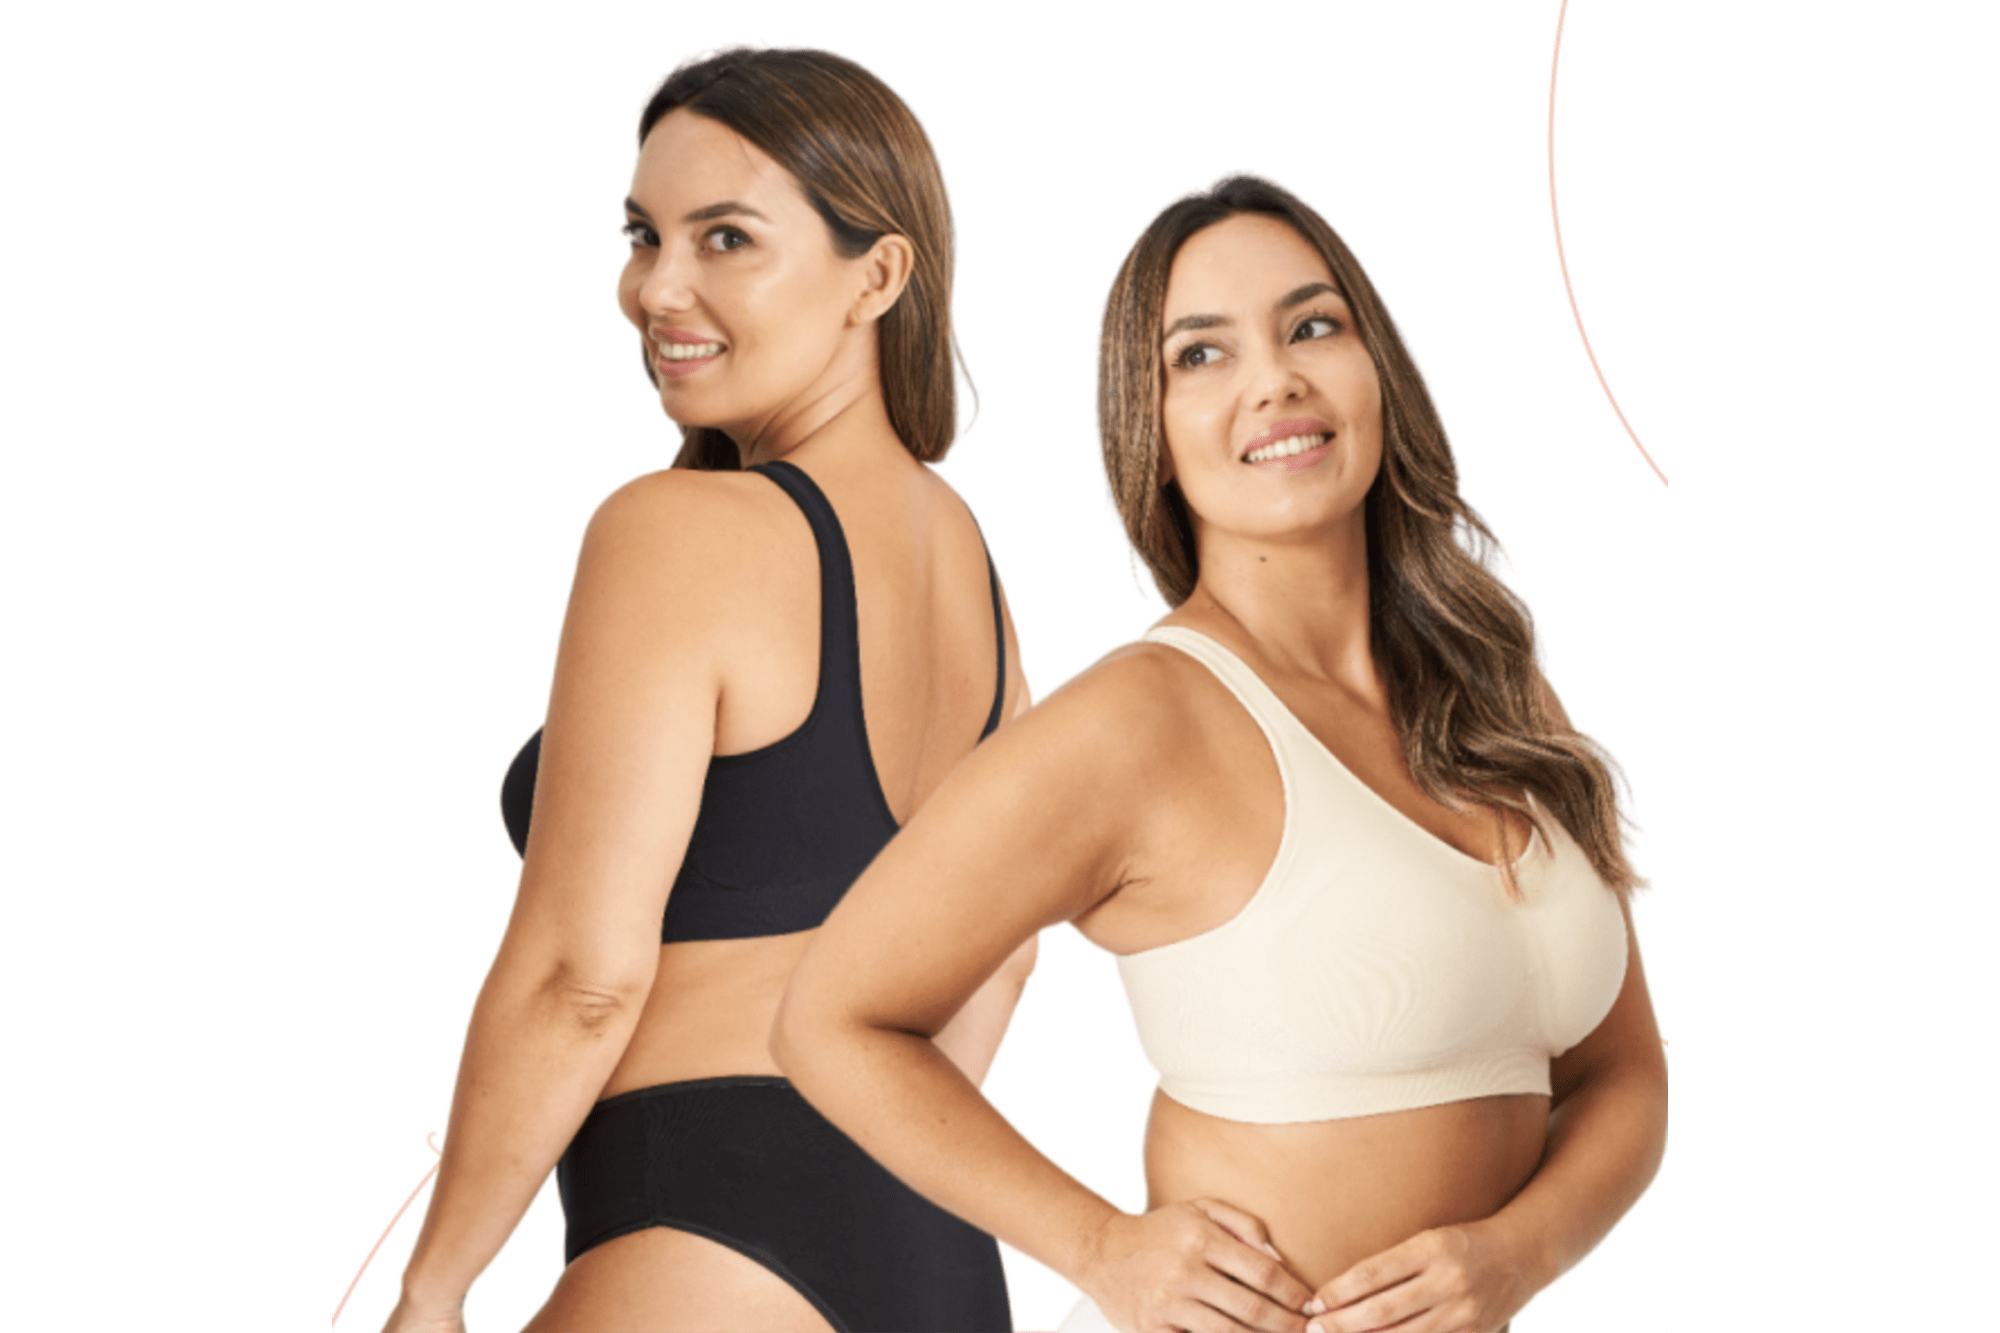 Buy Shapermint Compression Wirefree High Support Bra for Women